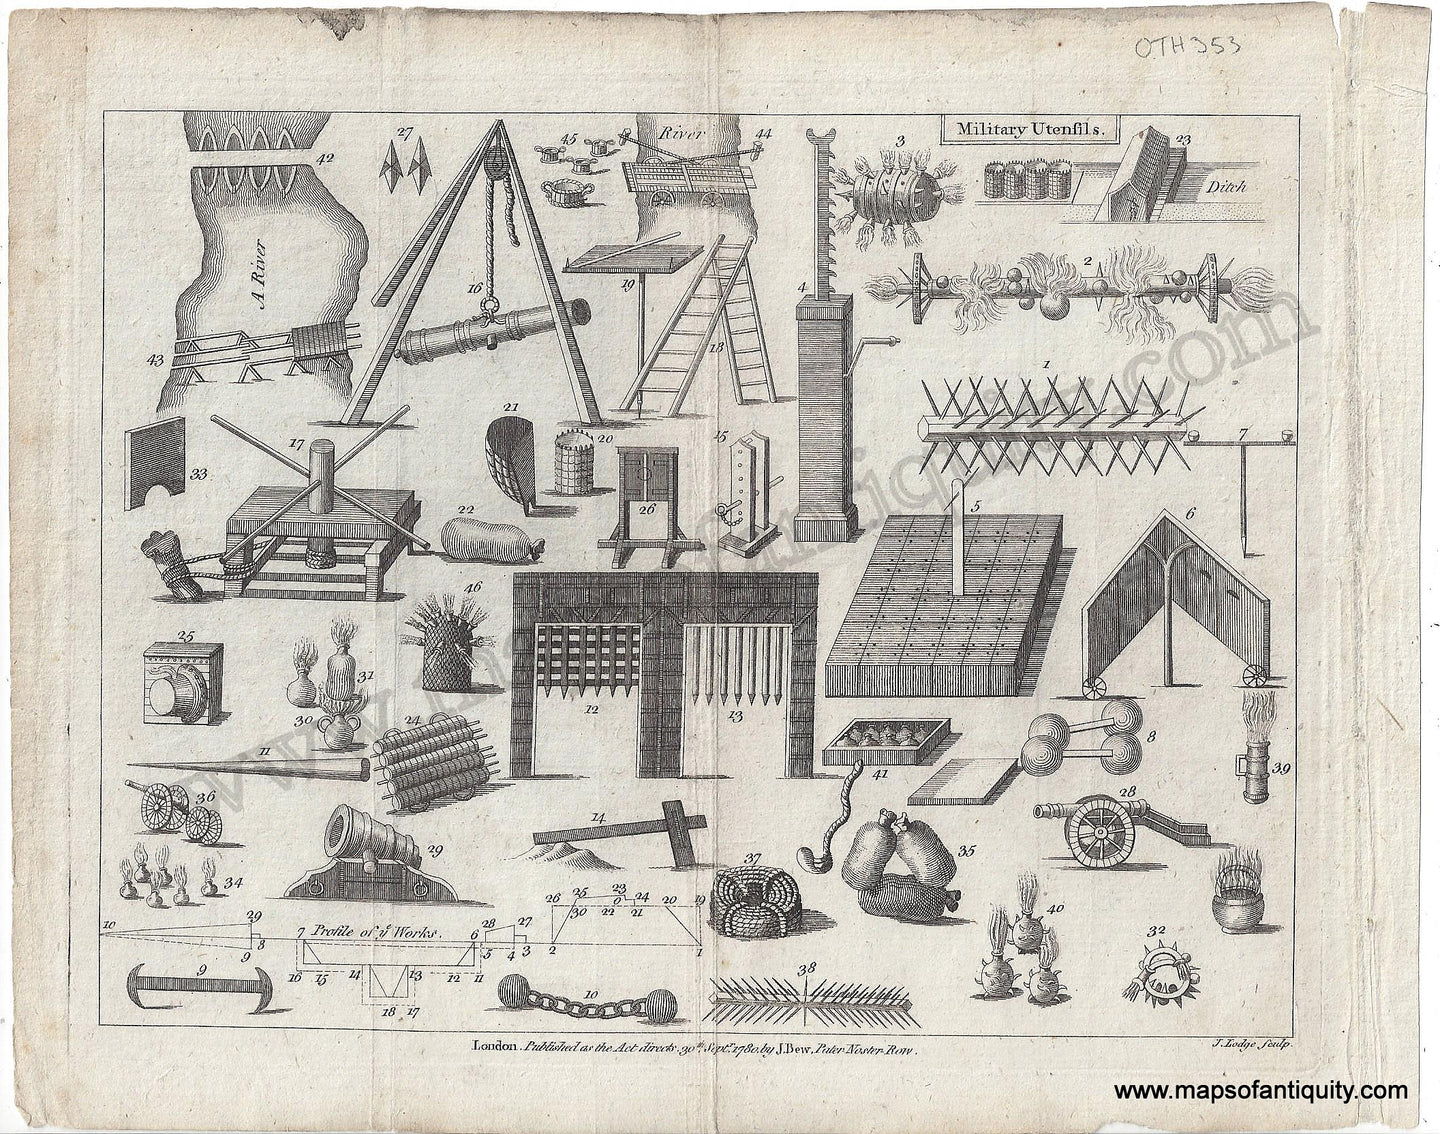 Antique-Print-A-General-Plan-of-Fortification-and-the-Manner-of-Carrying-on-a-Siege-1780-Lodge-/-Political-Magazine-1700s-18th-century-Maps-of-Antiquity